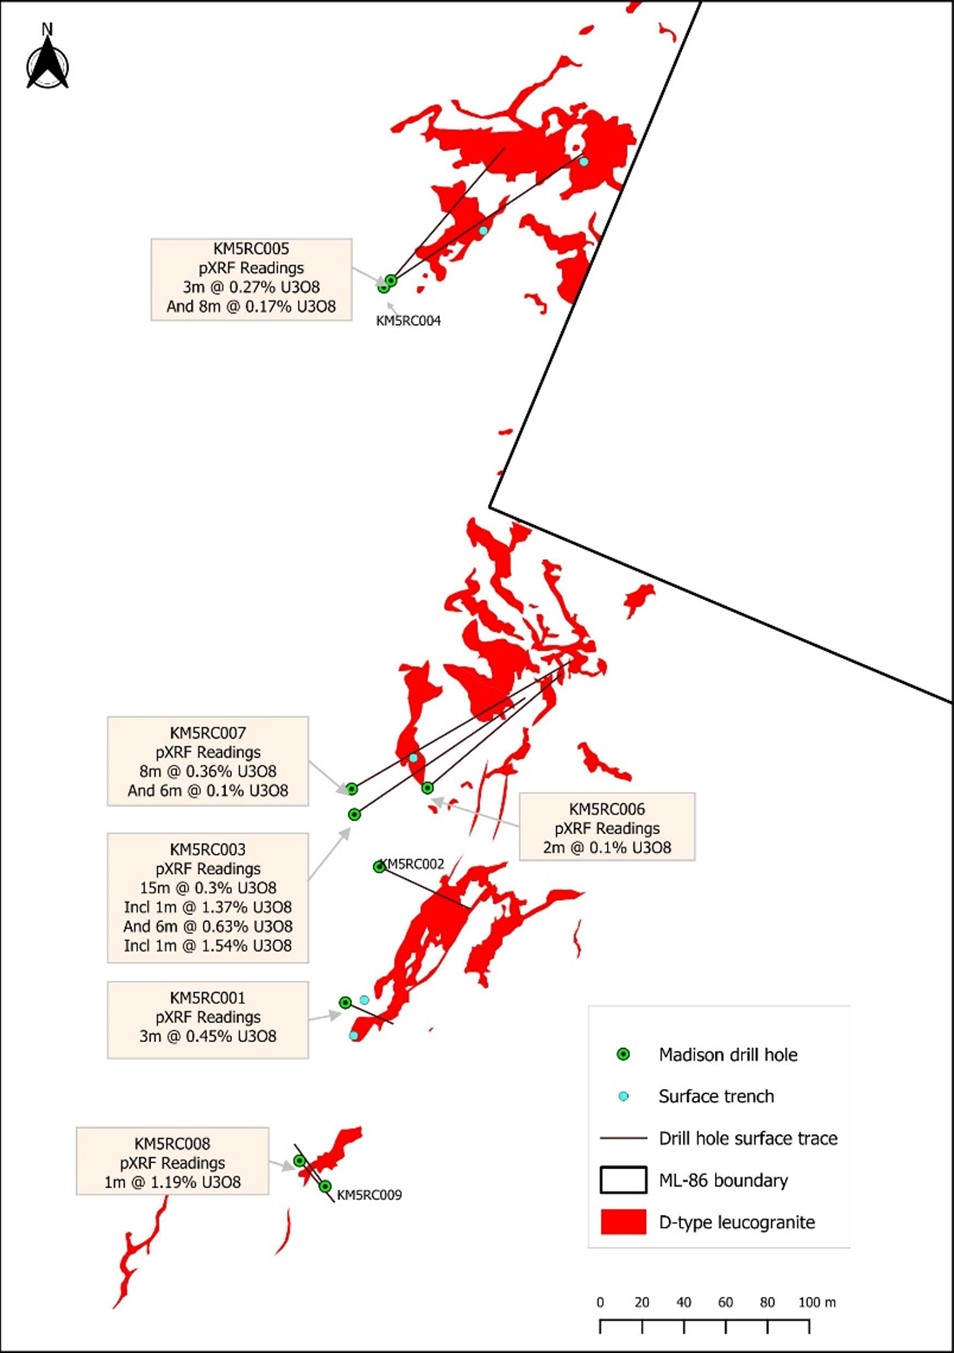 Location of the drill holes and significant observations